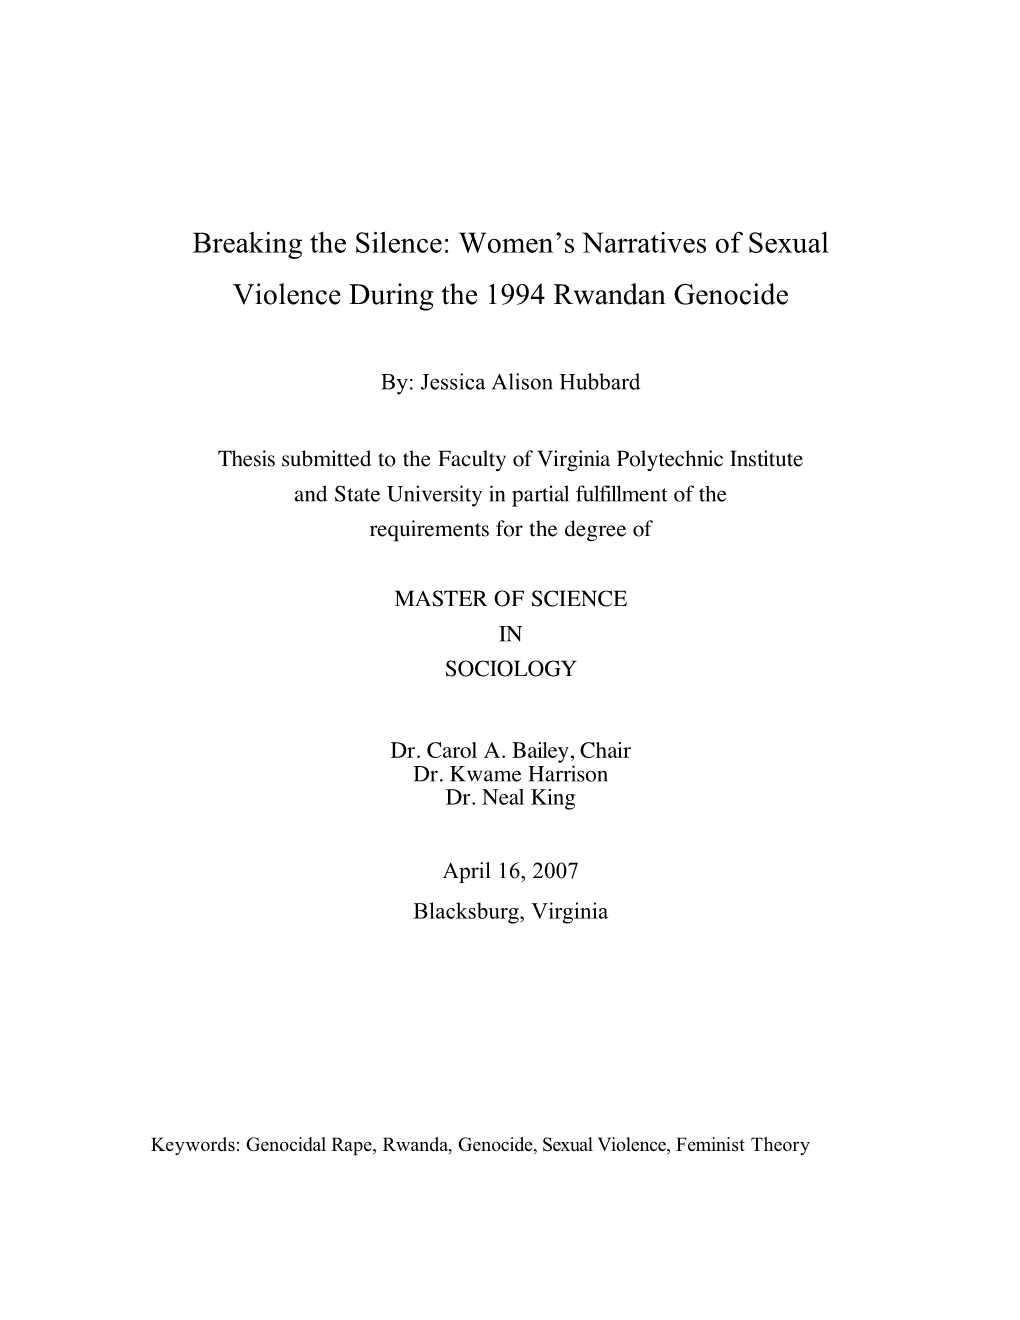 Breaking the Silence: Women's Narratives of Sexual Violence During the 1994 Rwandan Genocide